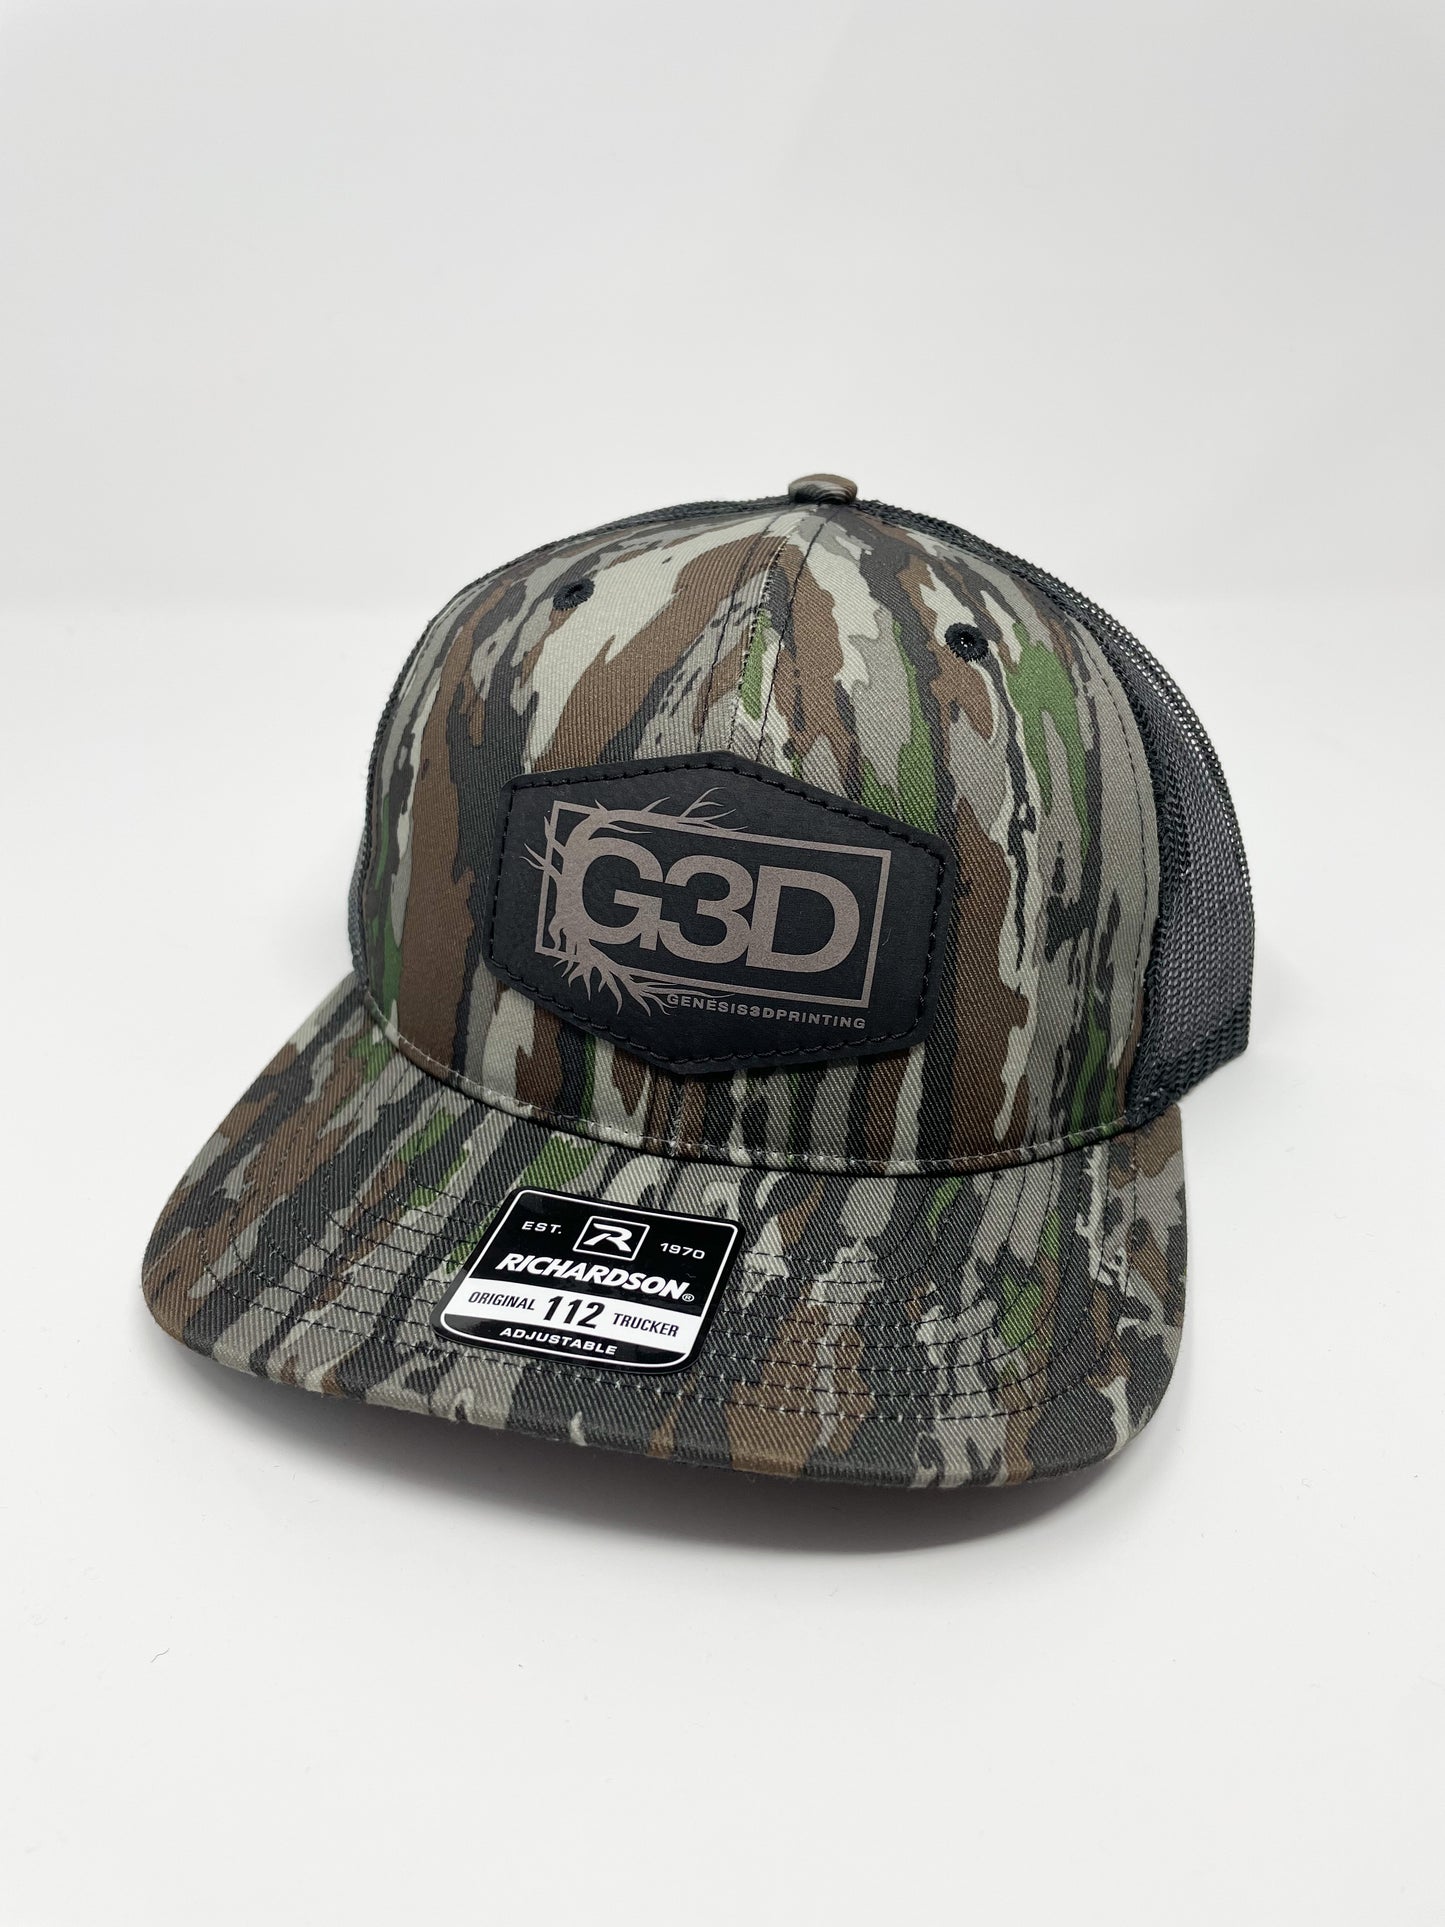 G3D Leather Patch Hat [Real Tree Original Camo]